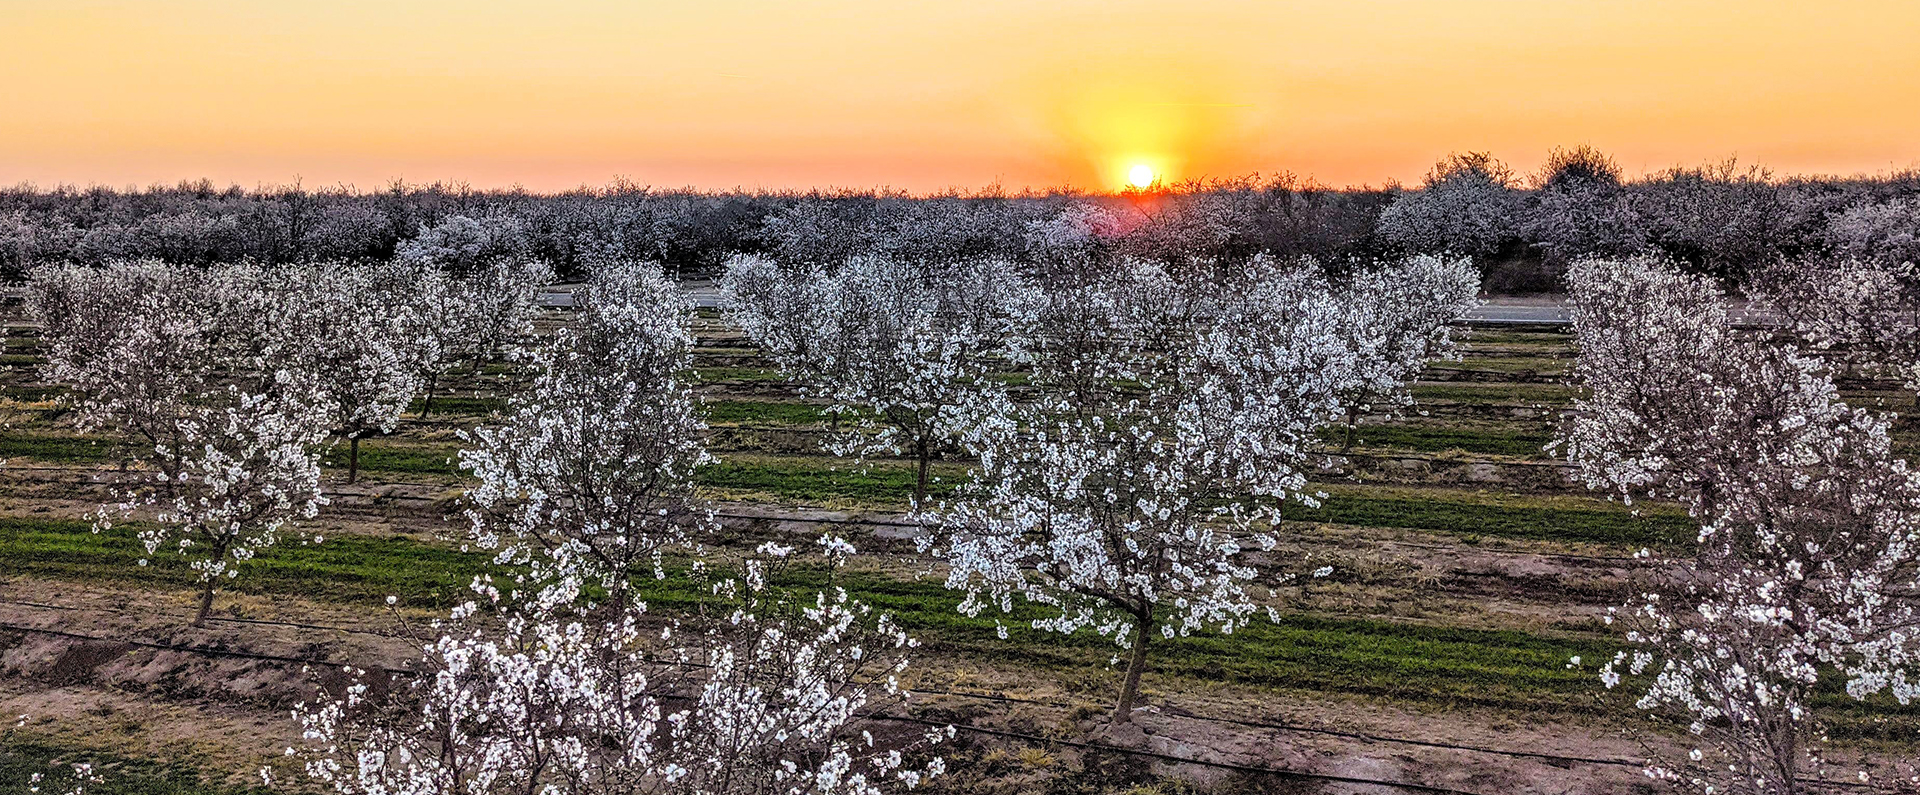 An orchard of almond trees at sunset